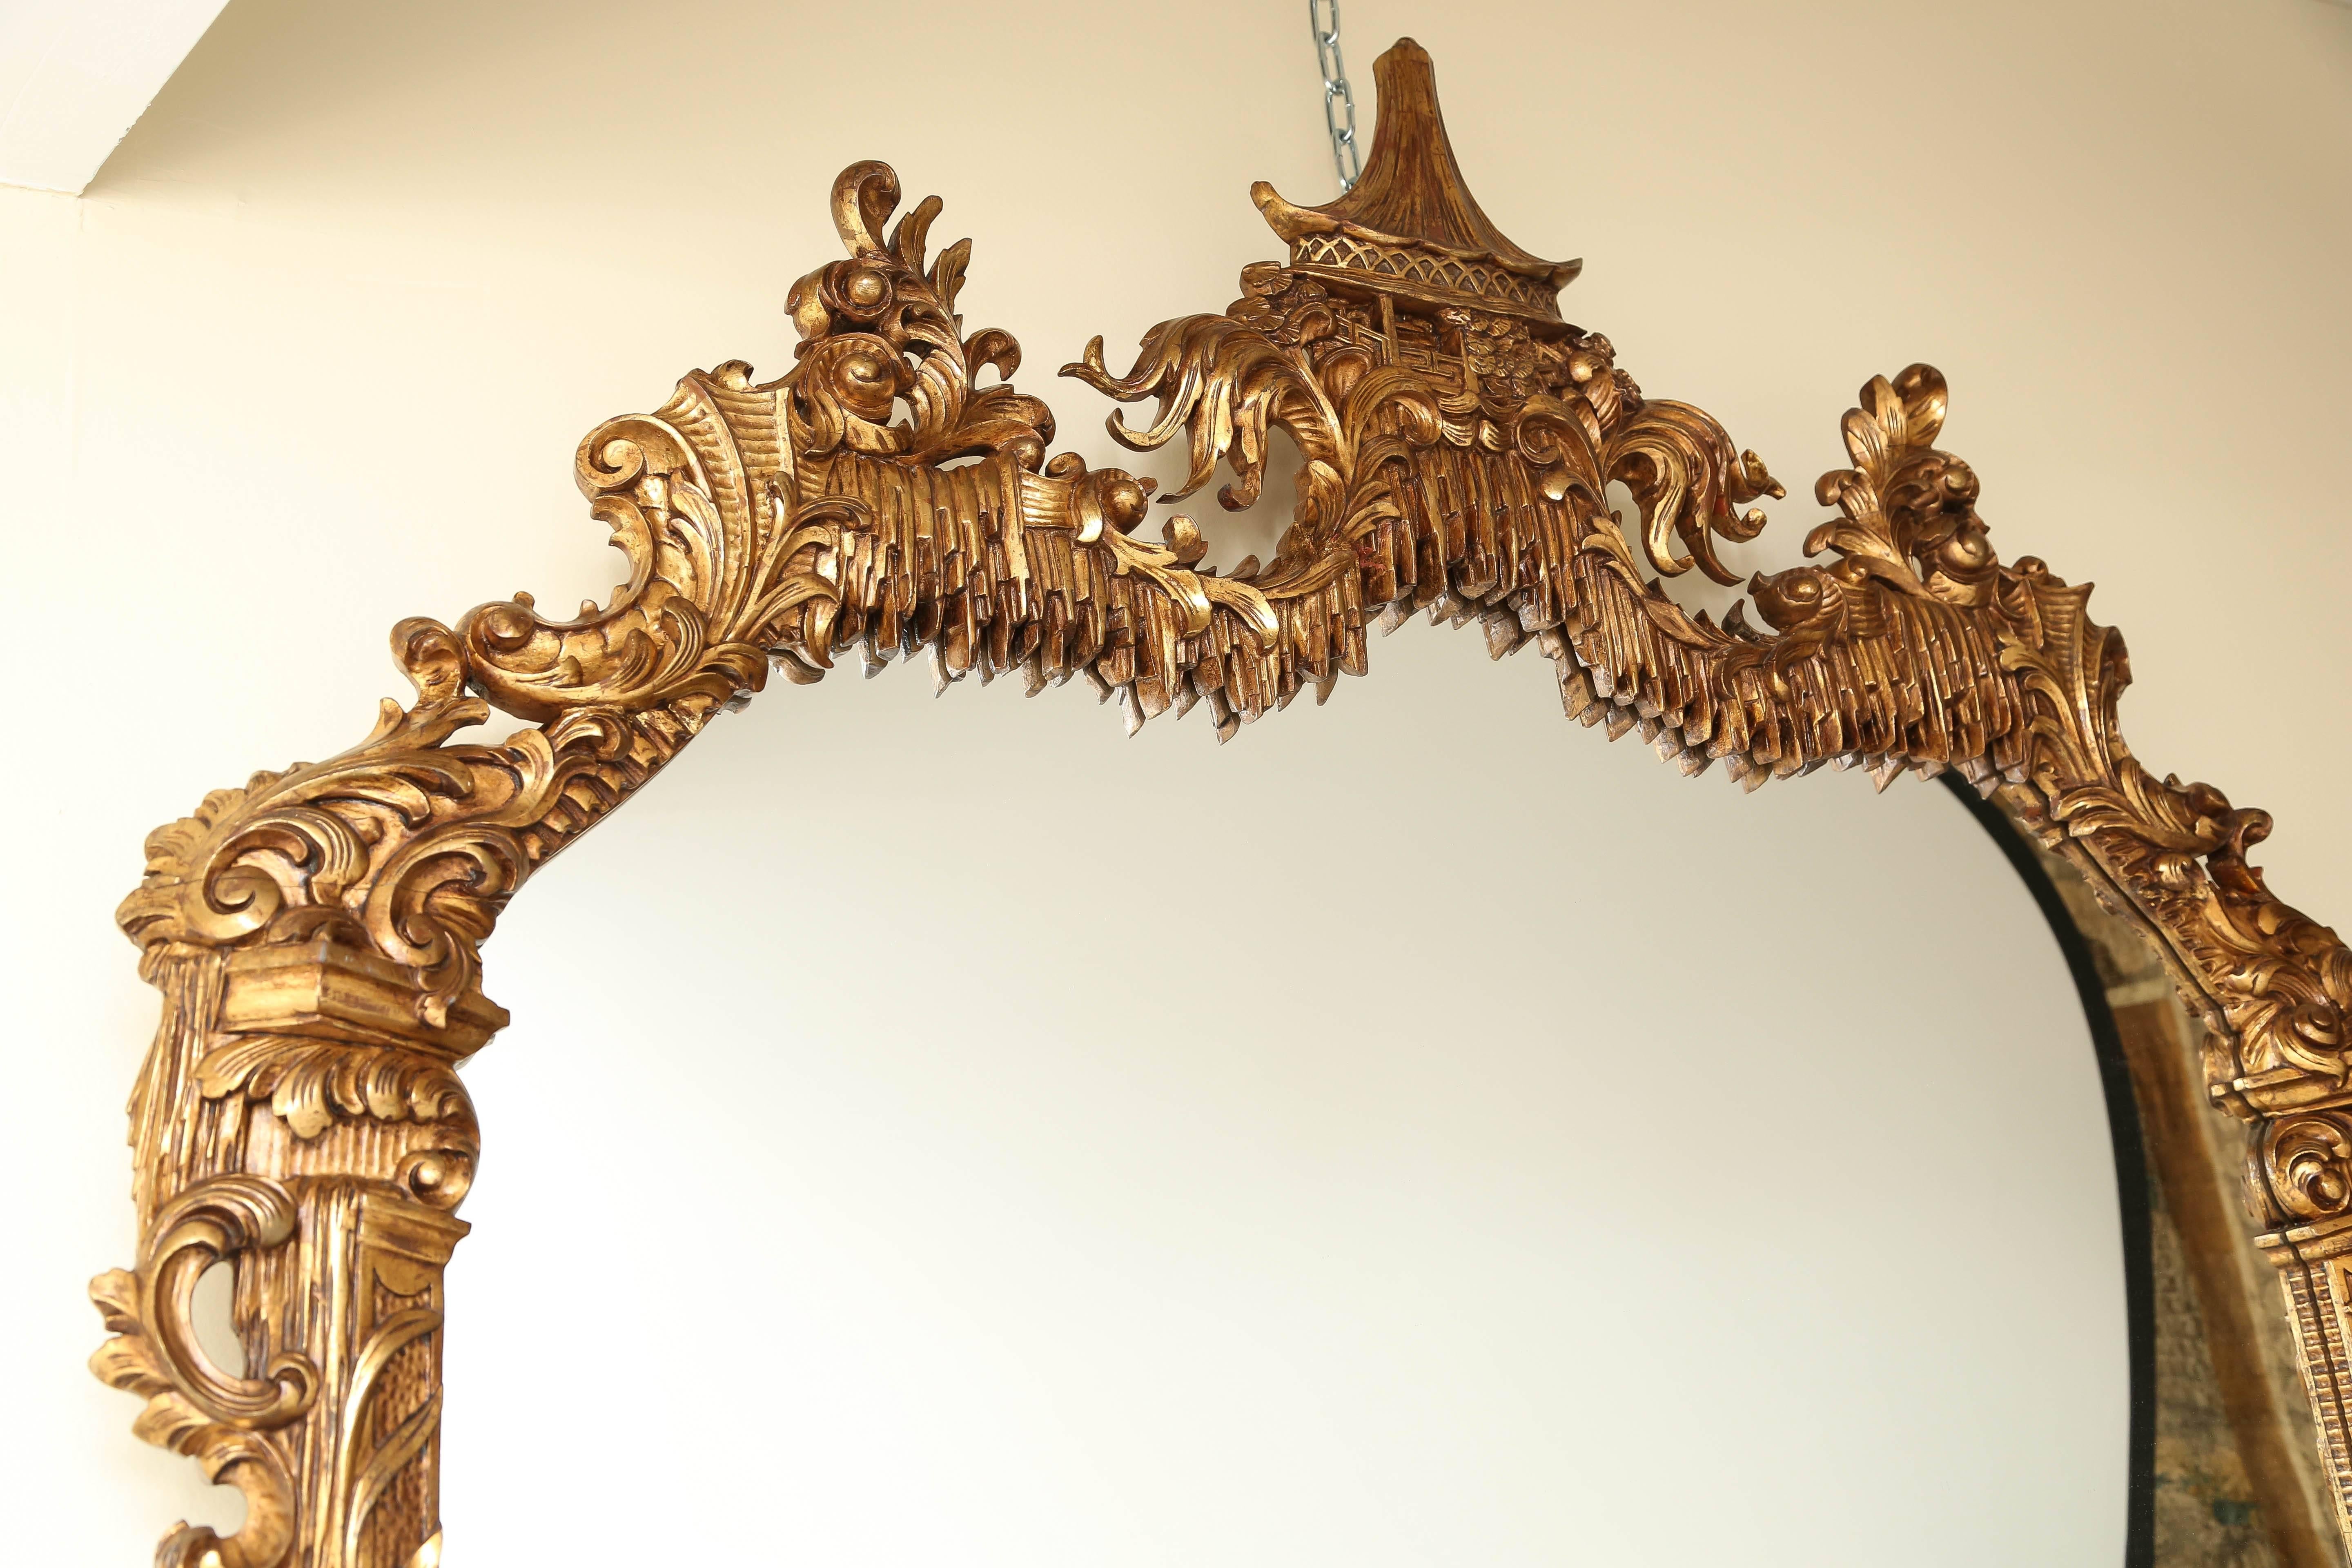 Magnificent giltwood mirror. In the Chinese Chippendale Style. Adorned with acanthus leaves, elegant scrolled carvings. Crowned with a Pagoda style pavillion surmounted in a 'floating' garden setting with a lambrequin apron. Bottom Apron featuring a